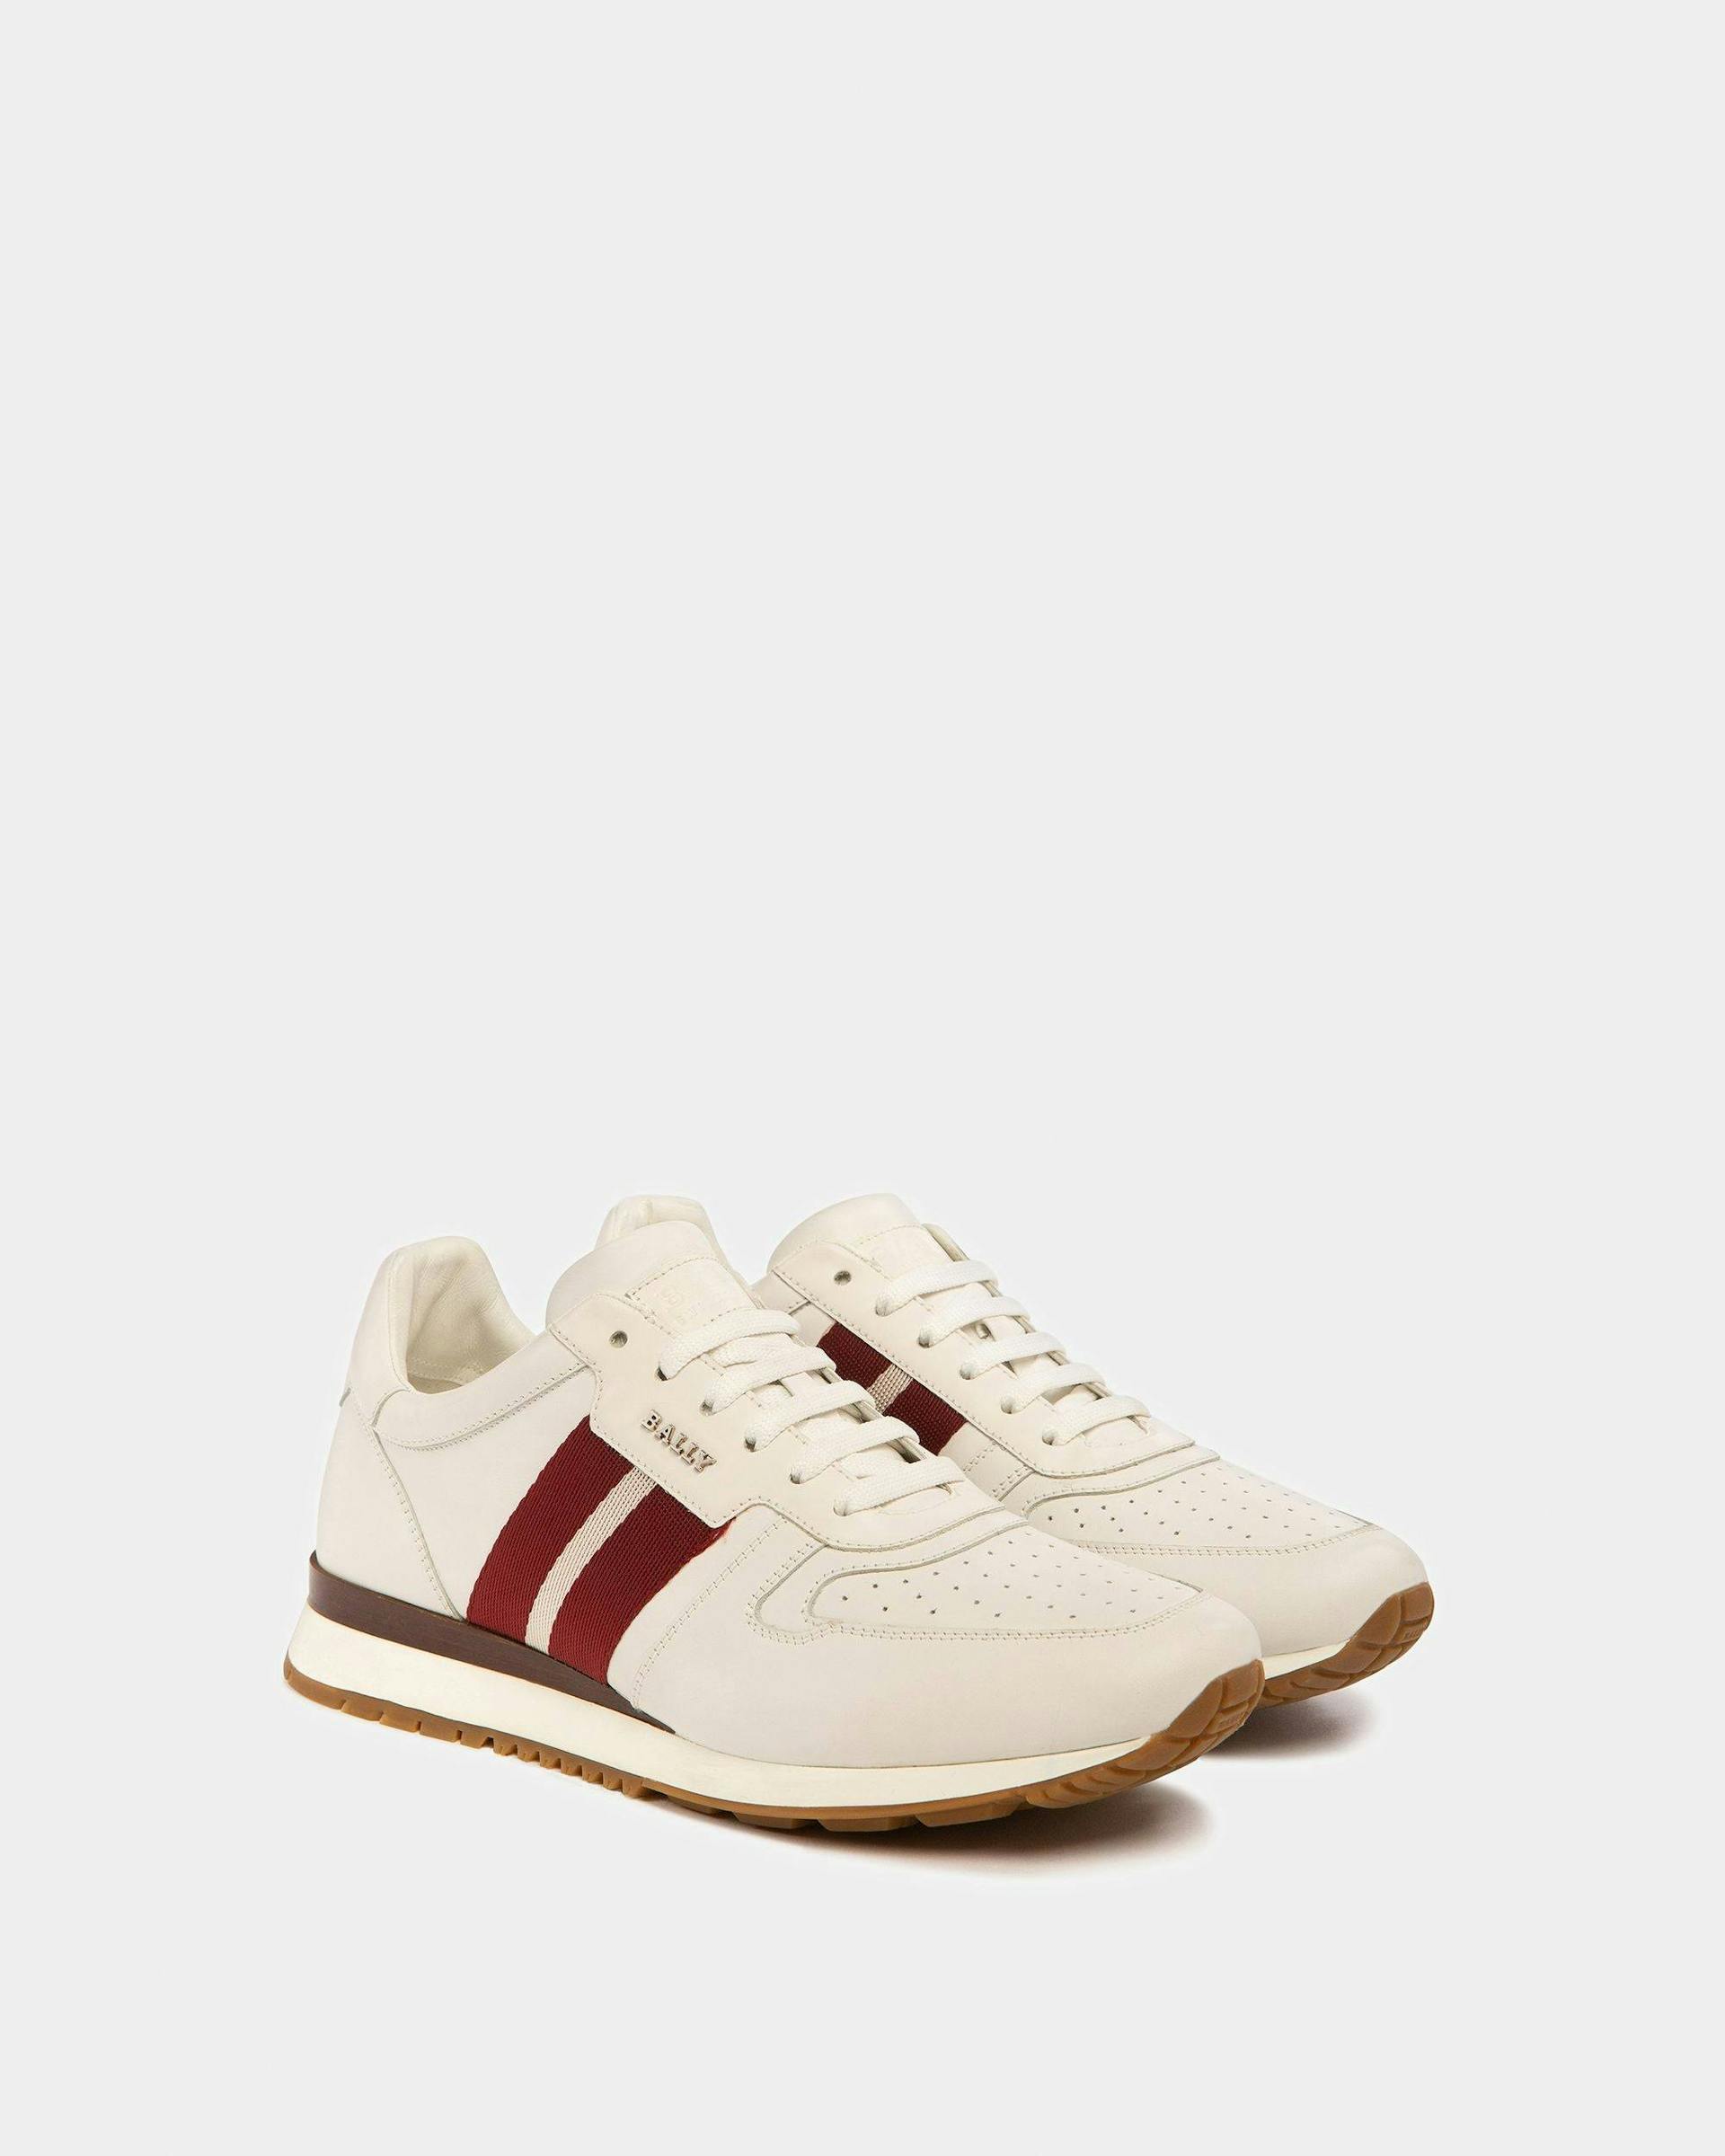 Astel Leather Sneakers In White - Men's - Bally - 03